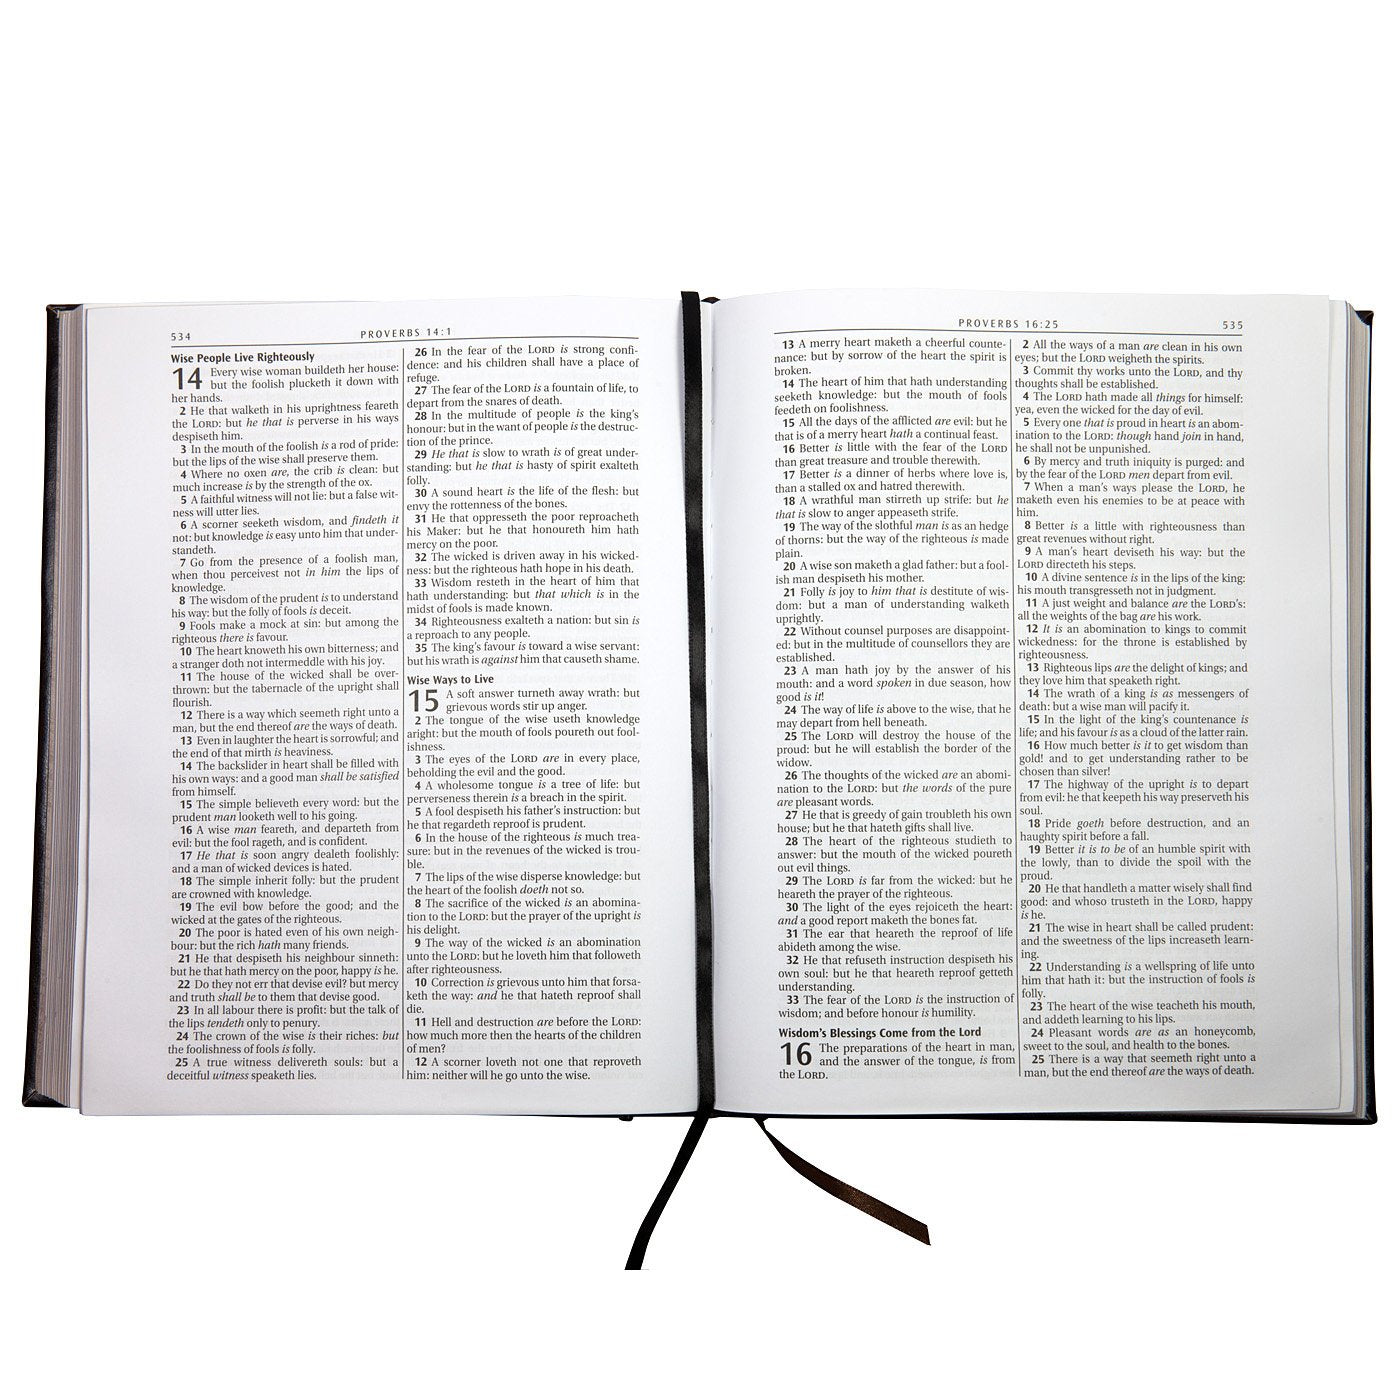 KJV Holy Bible, Classically Illustrated Heirloom Family Bible